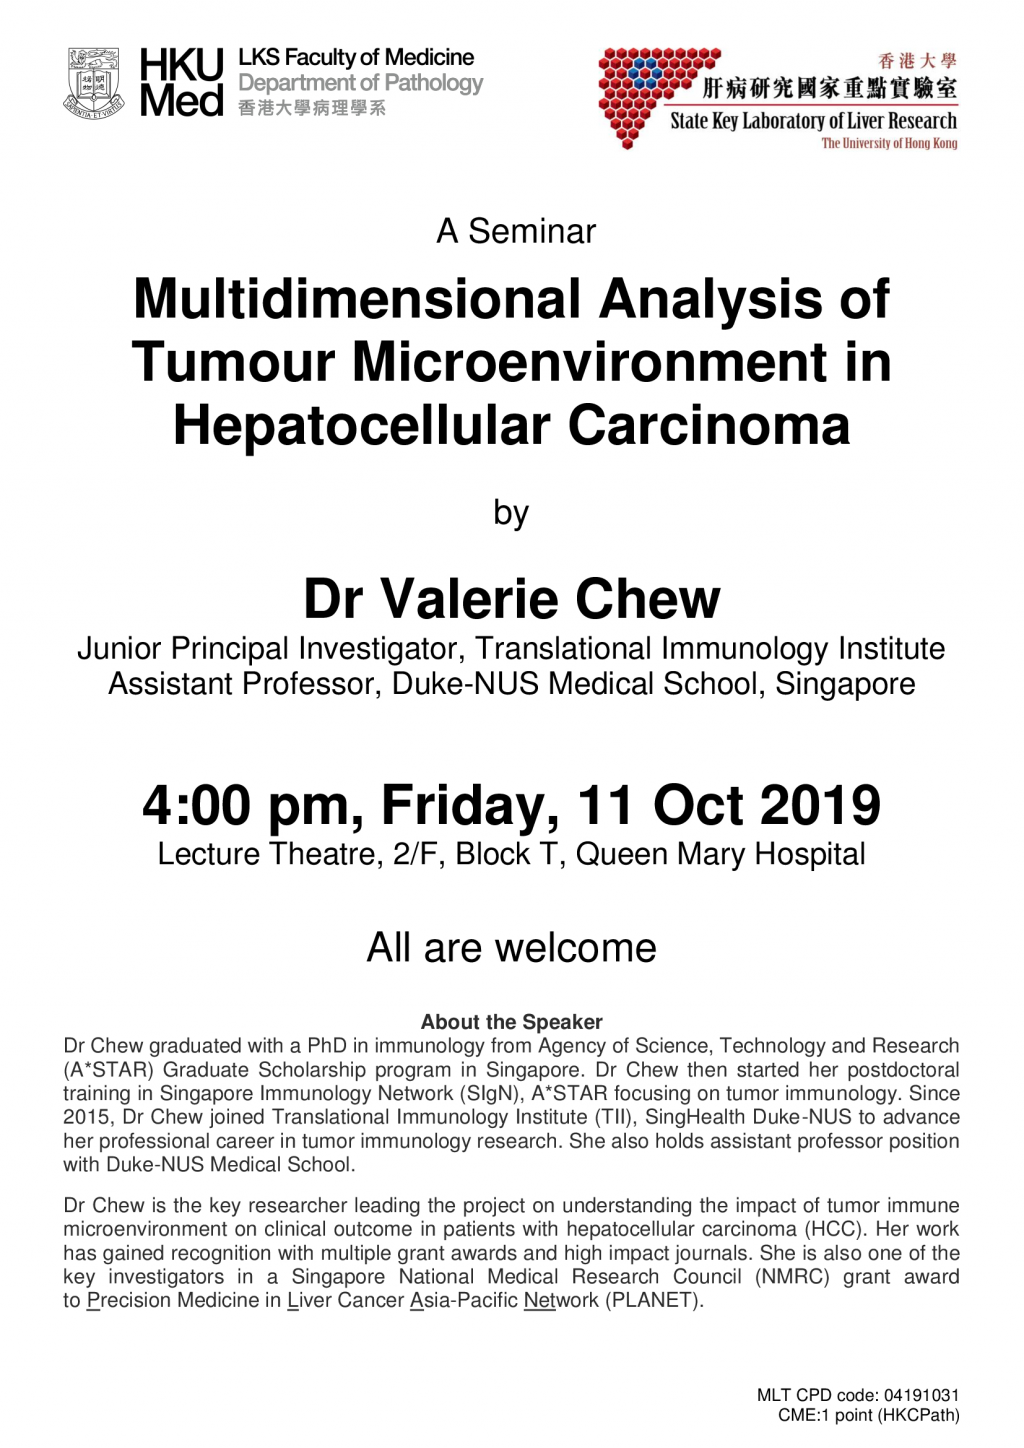 A seminar by Dr Valerie Chew on Oct 11 (4pm)